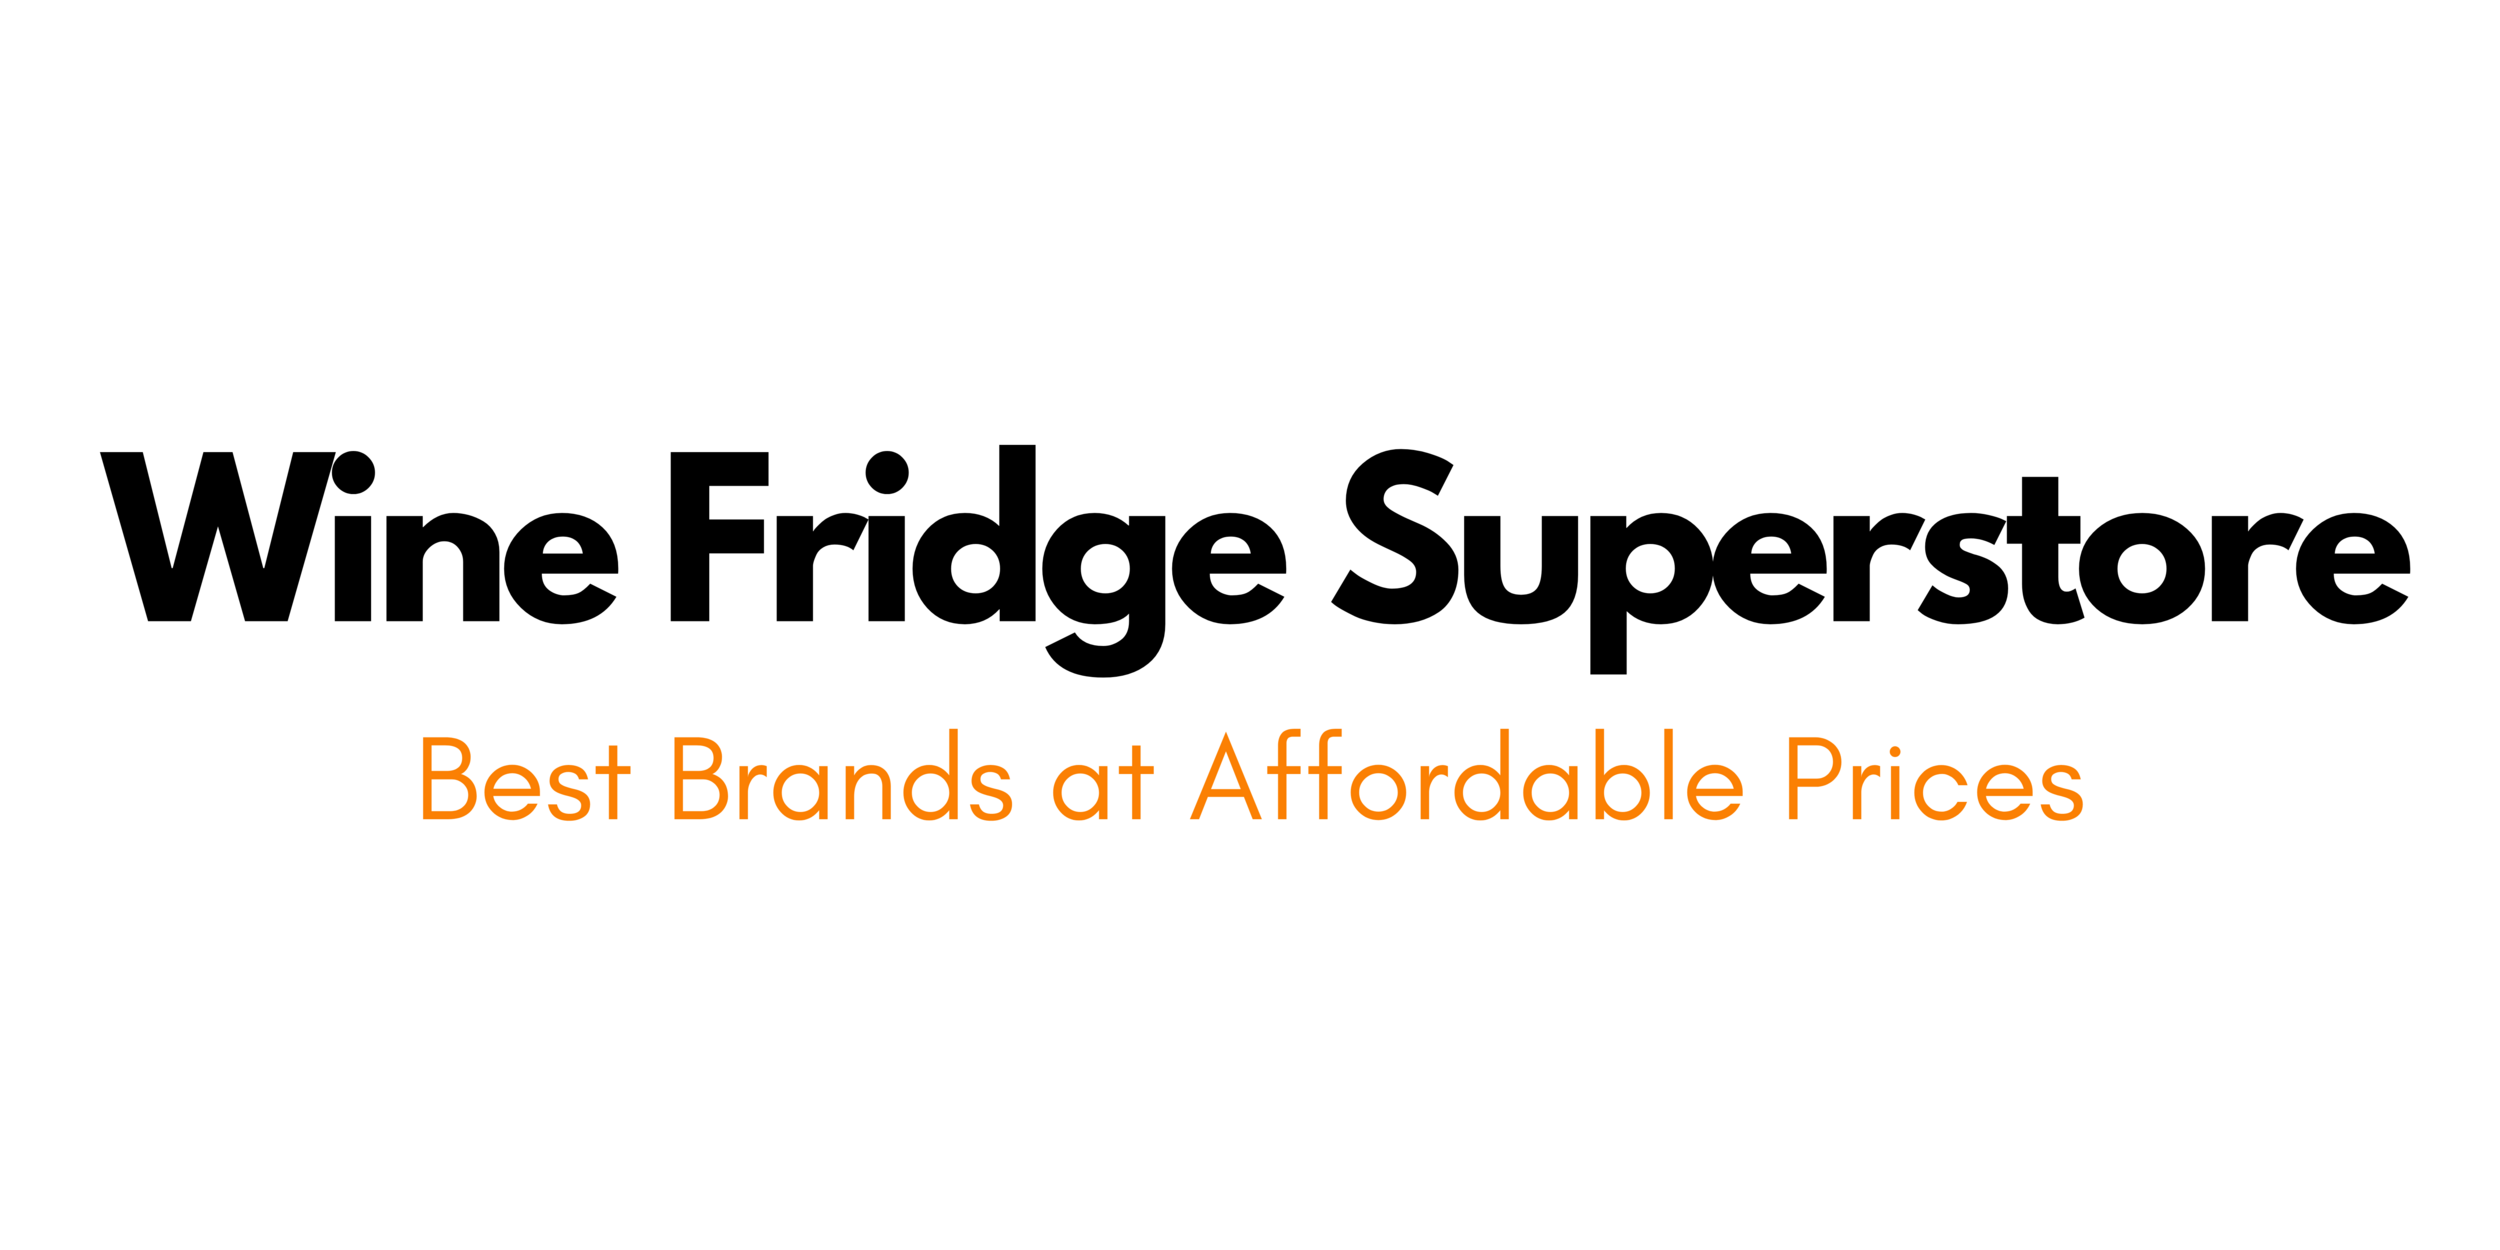 Wine Fridge Superstore - Best Brands At Affordable Prices